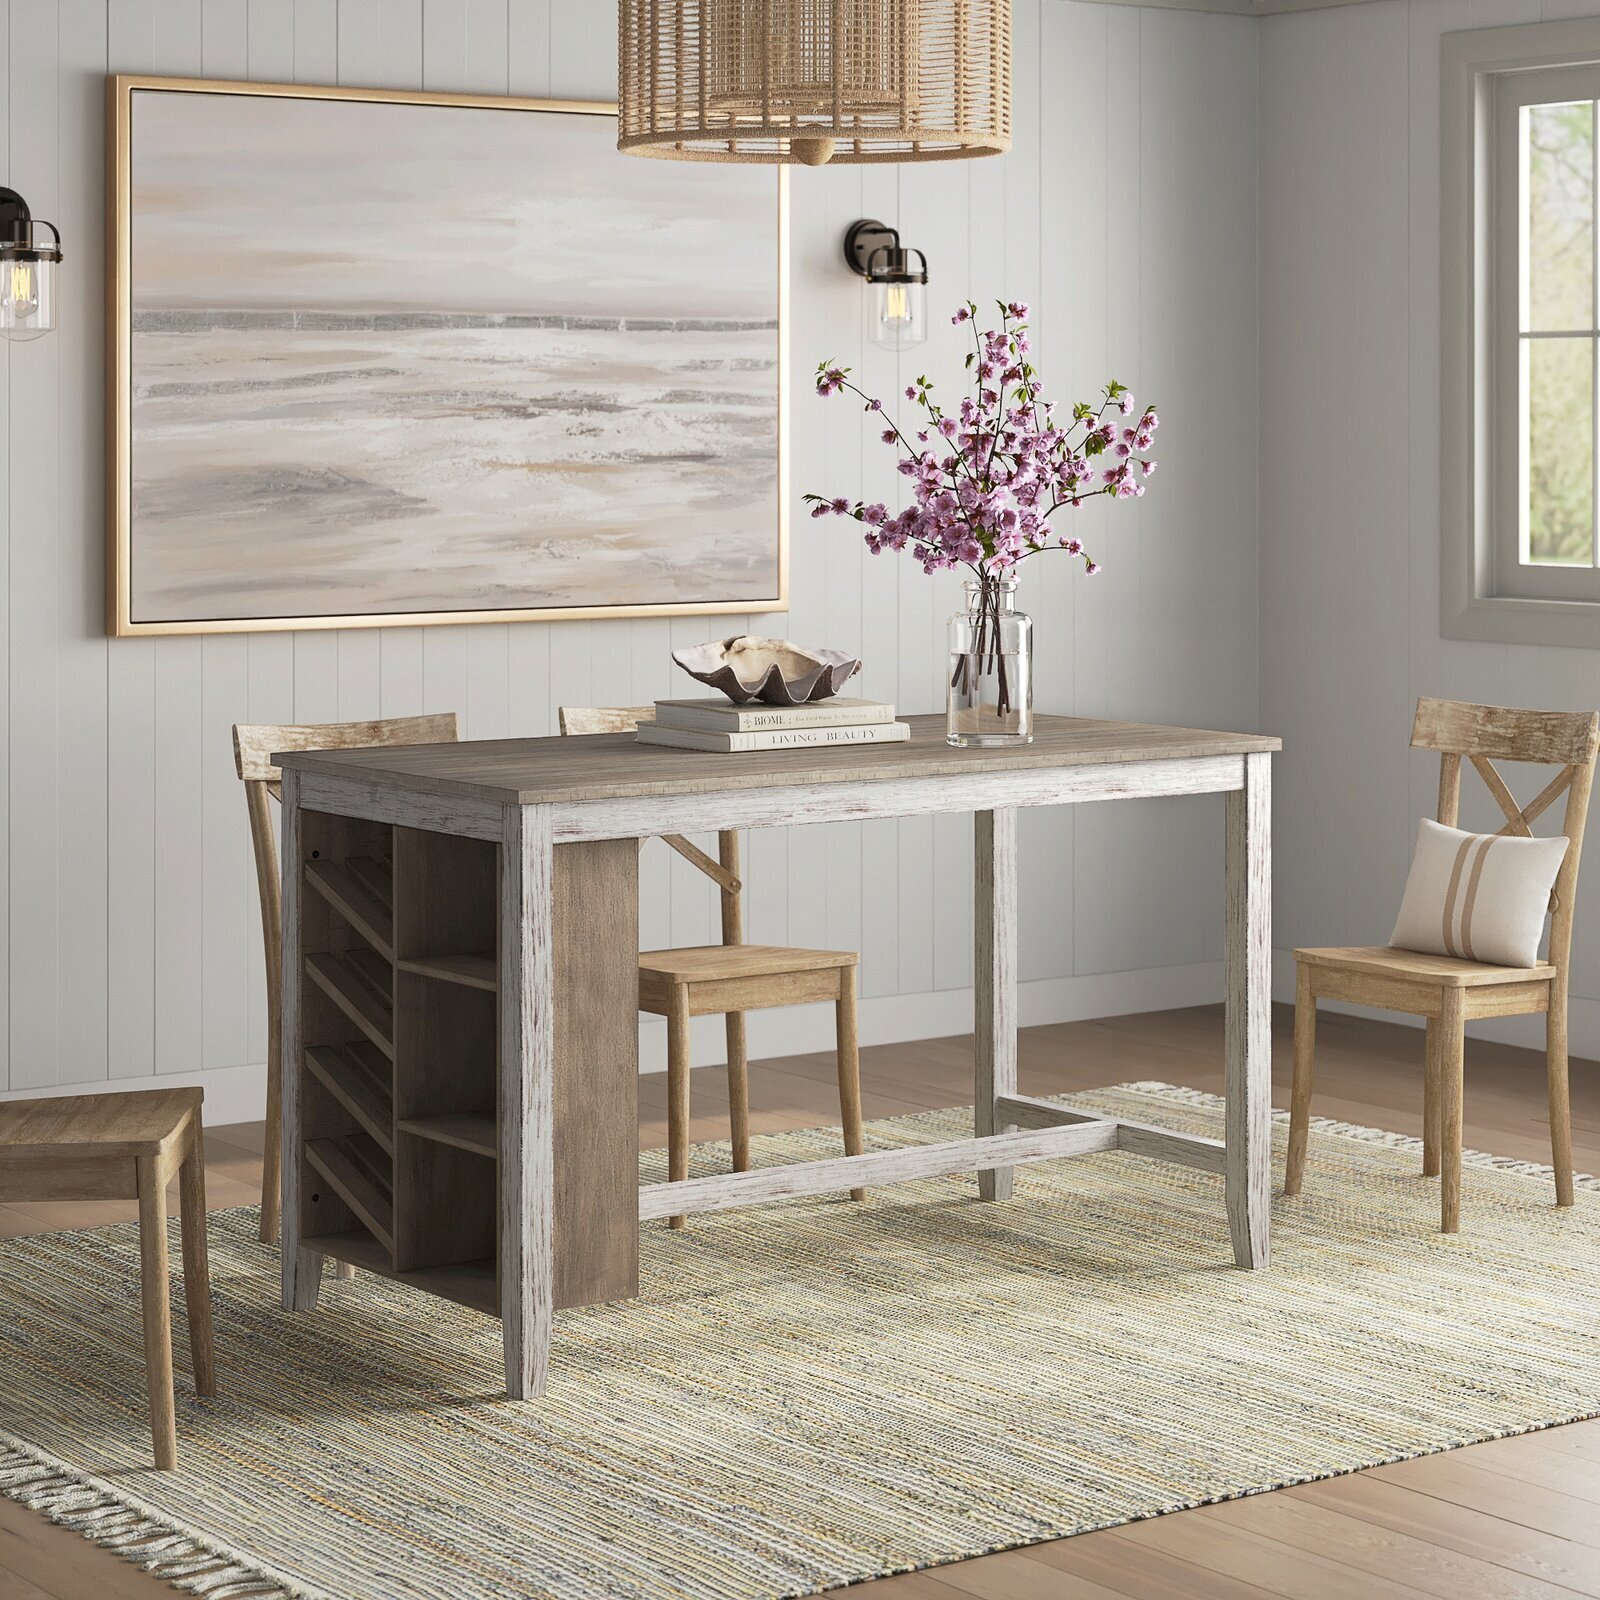 Counter height dining table with farmhouse appeal